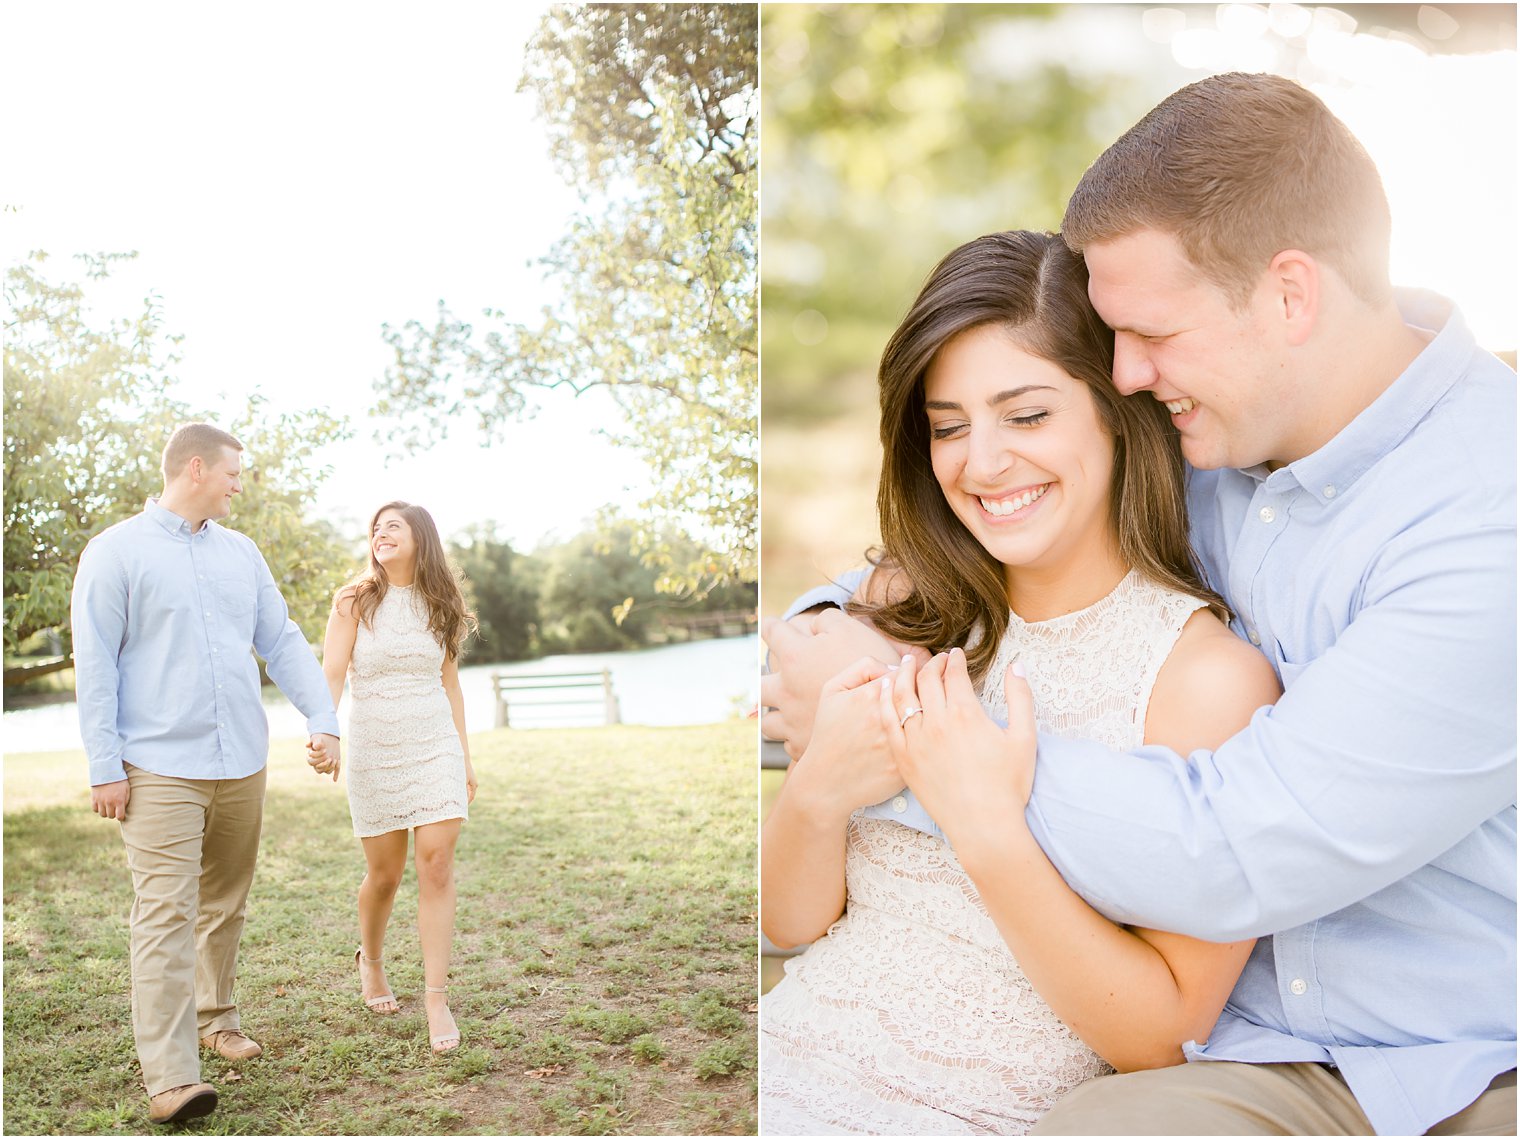 Candid wedding photos in NJ engagement session